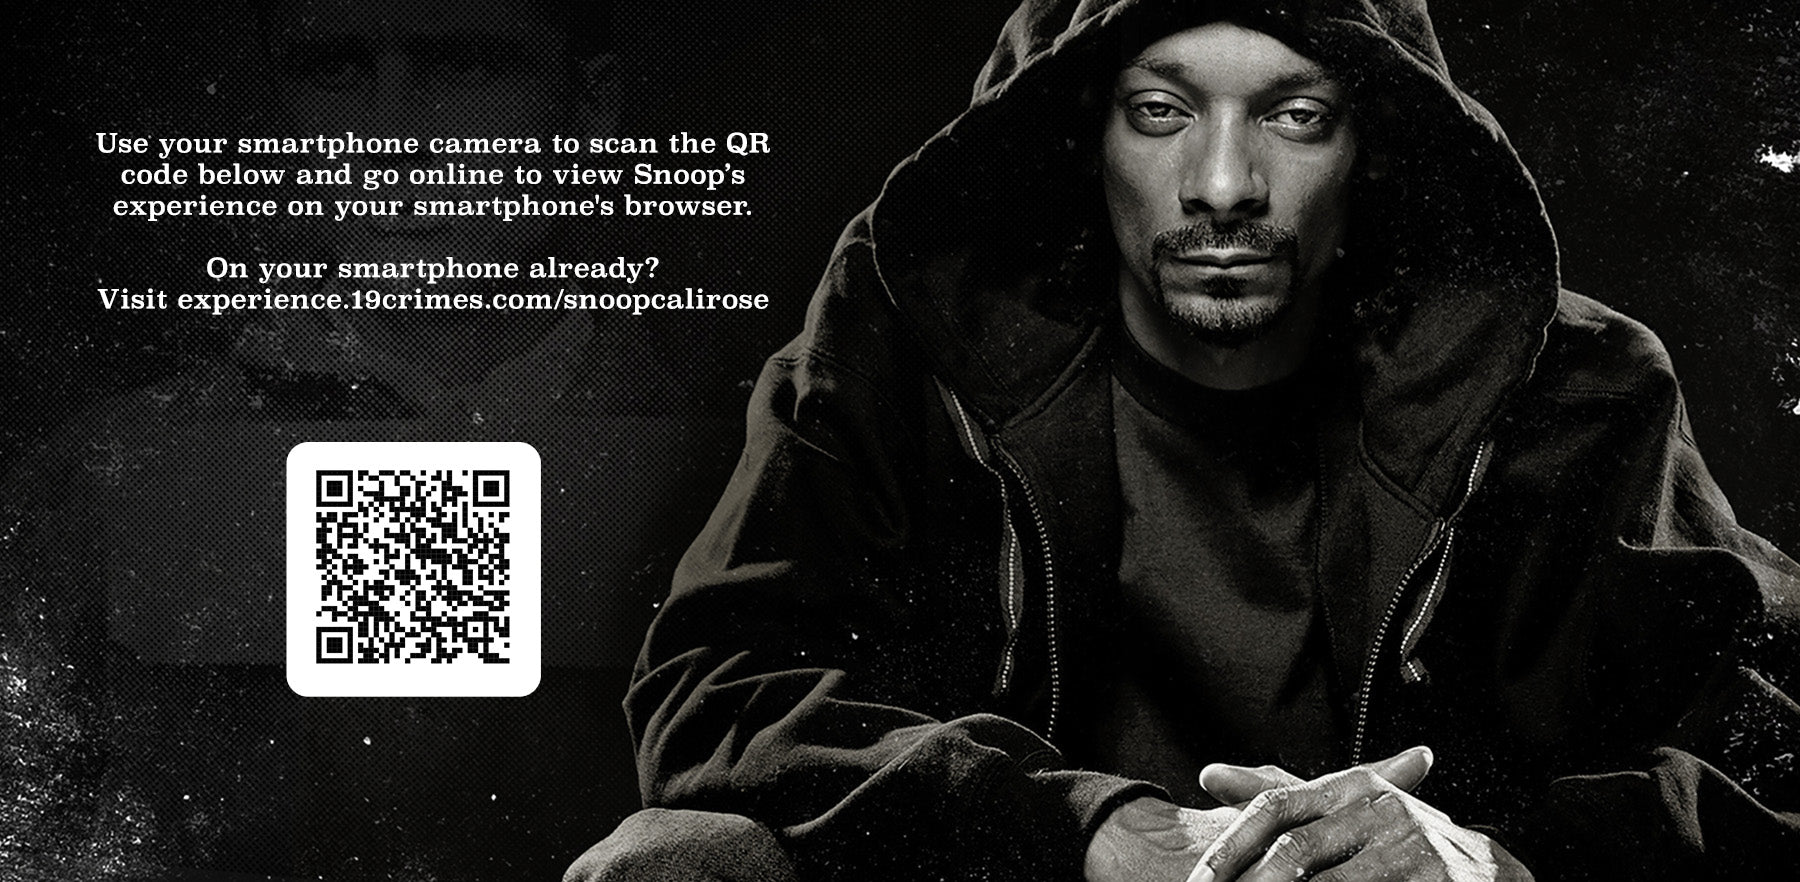 go to experience.19crimes.com/snoopcalirose on your smart phone browser